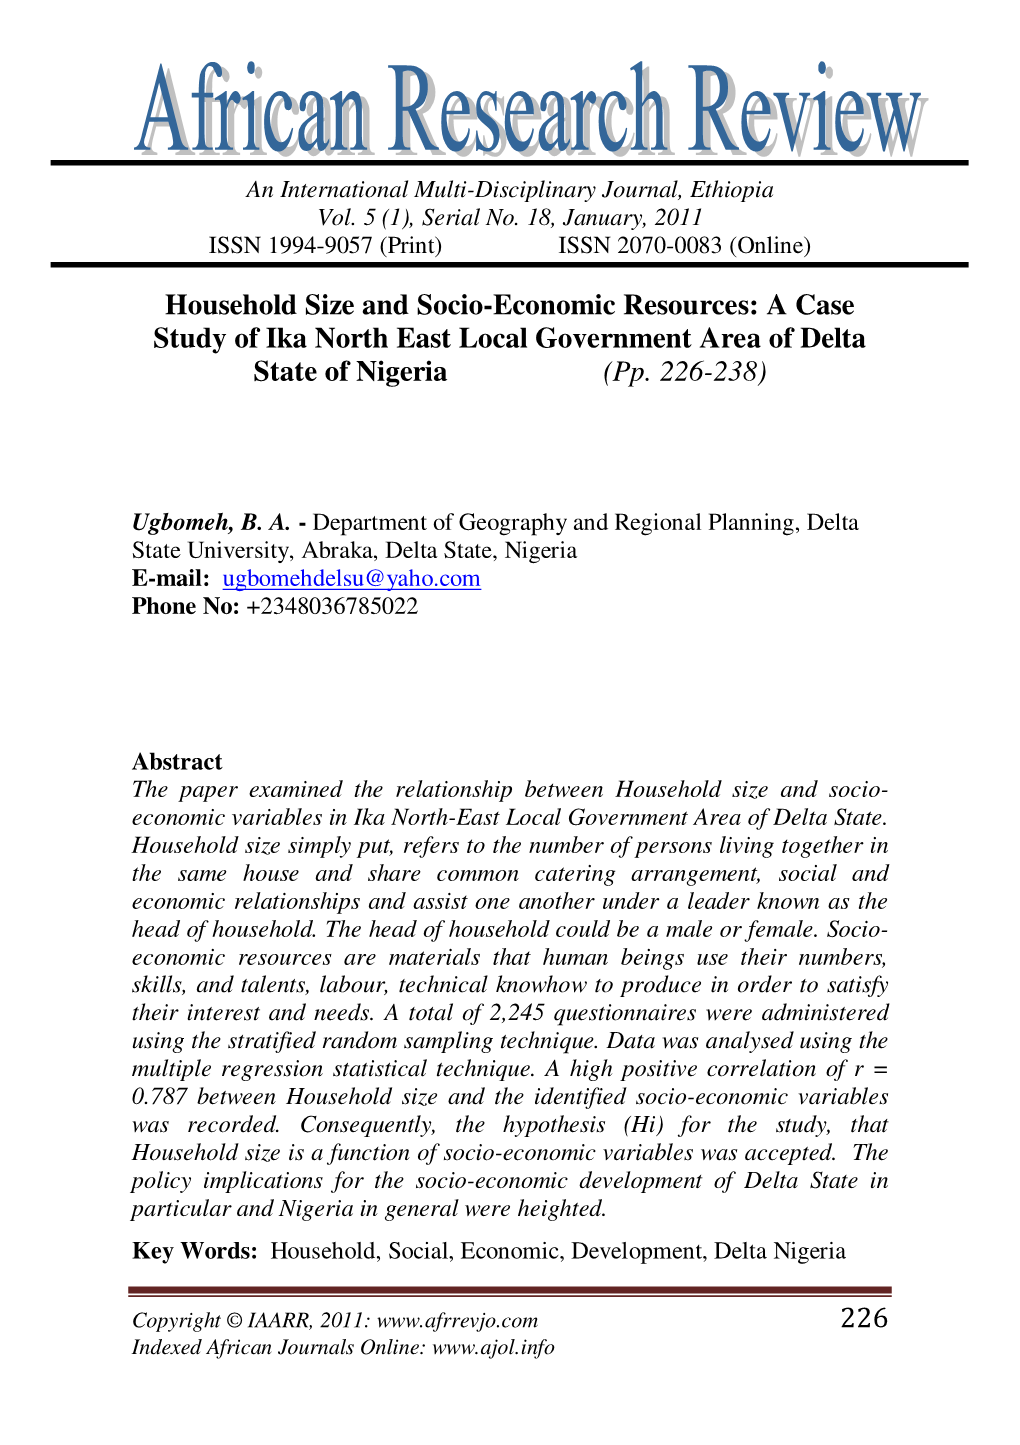 A Case Study of Ika North East Local Government Area of Delta State of Nigeria (Pp